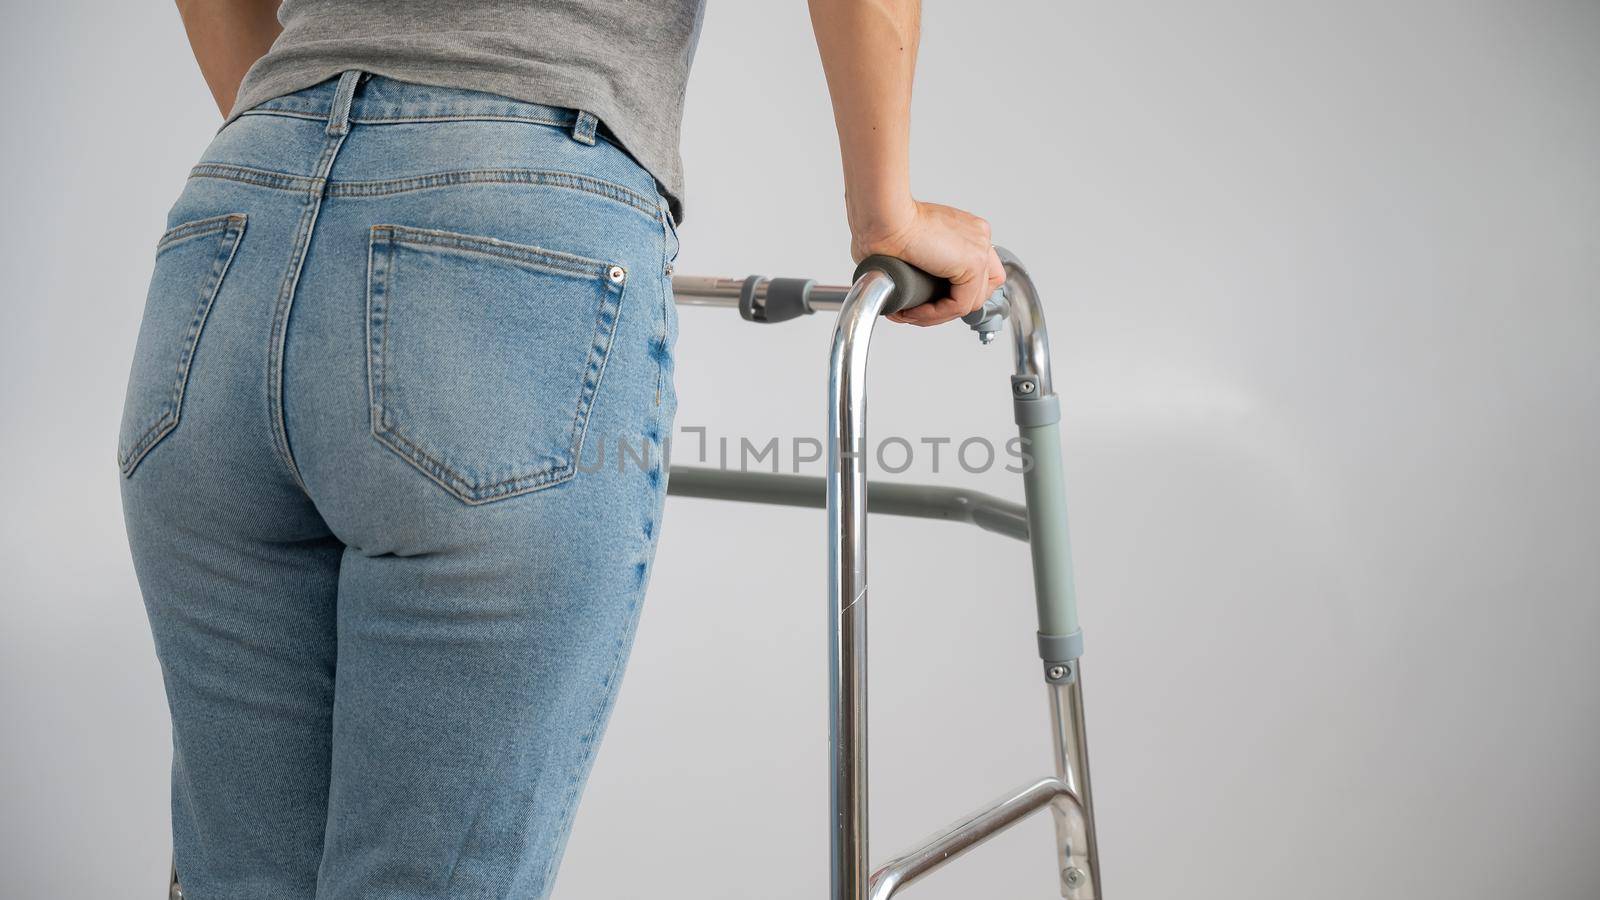 A woman is walking with a walker on a white background.